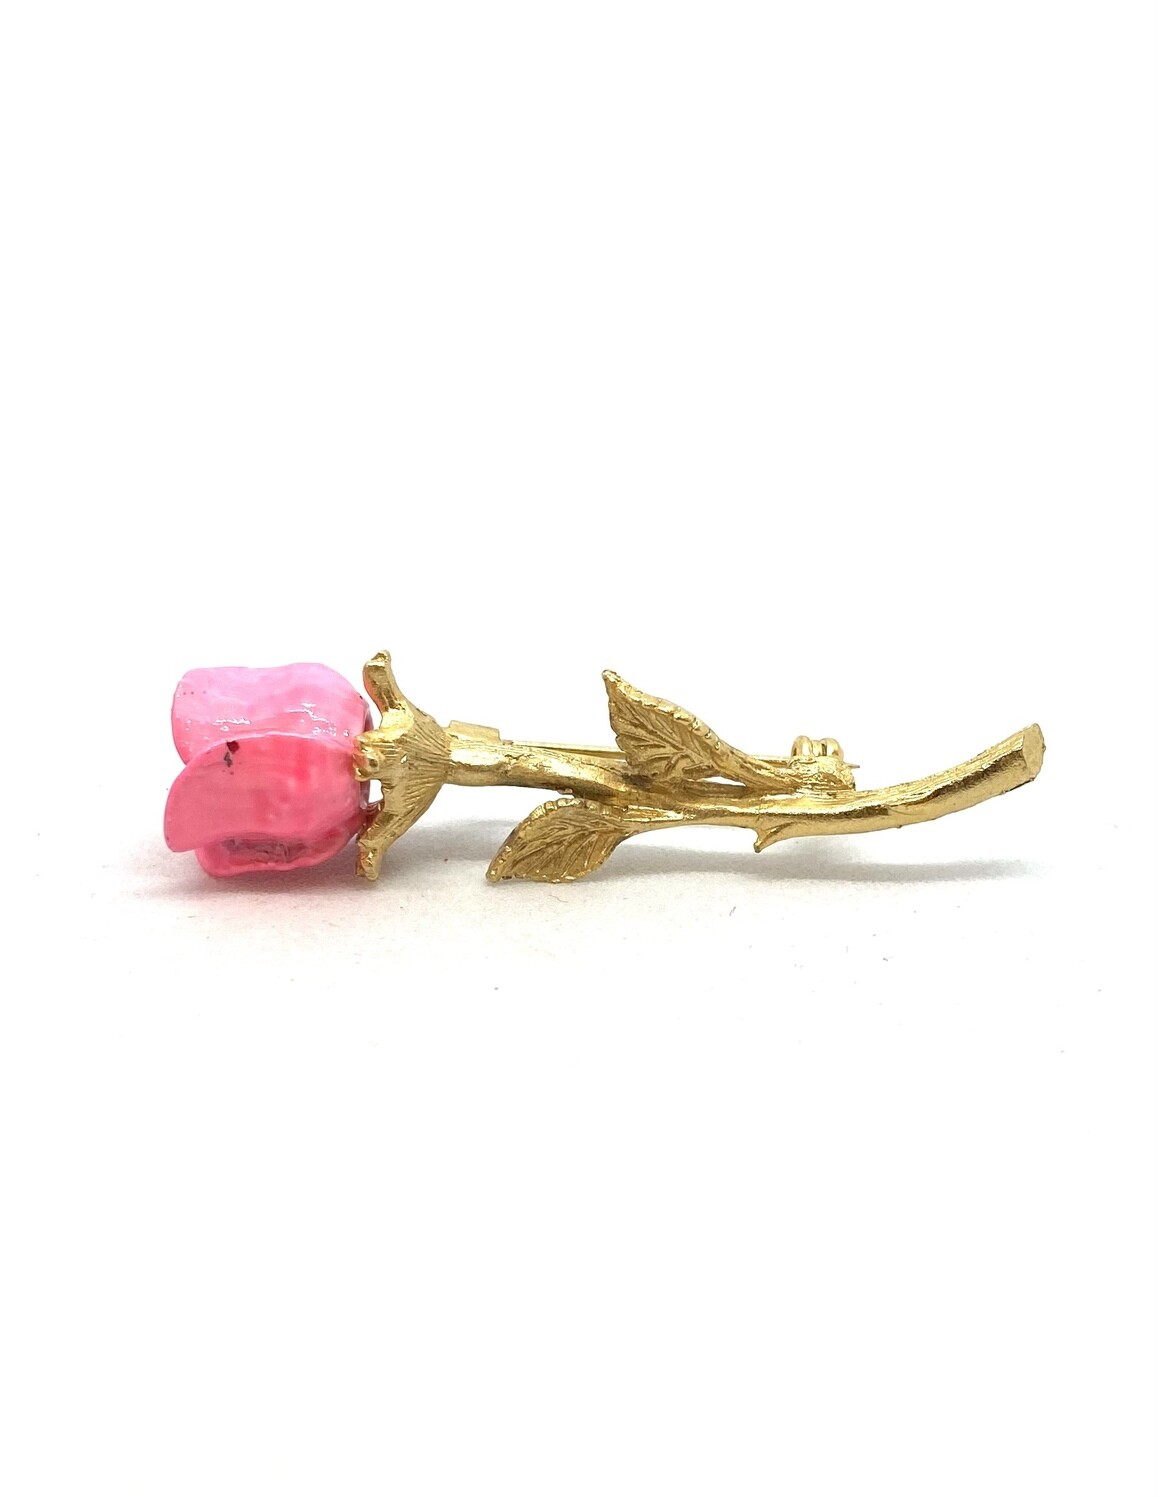 “The Changing Rose” Brooch